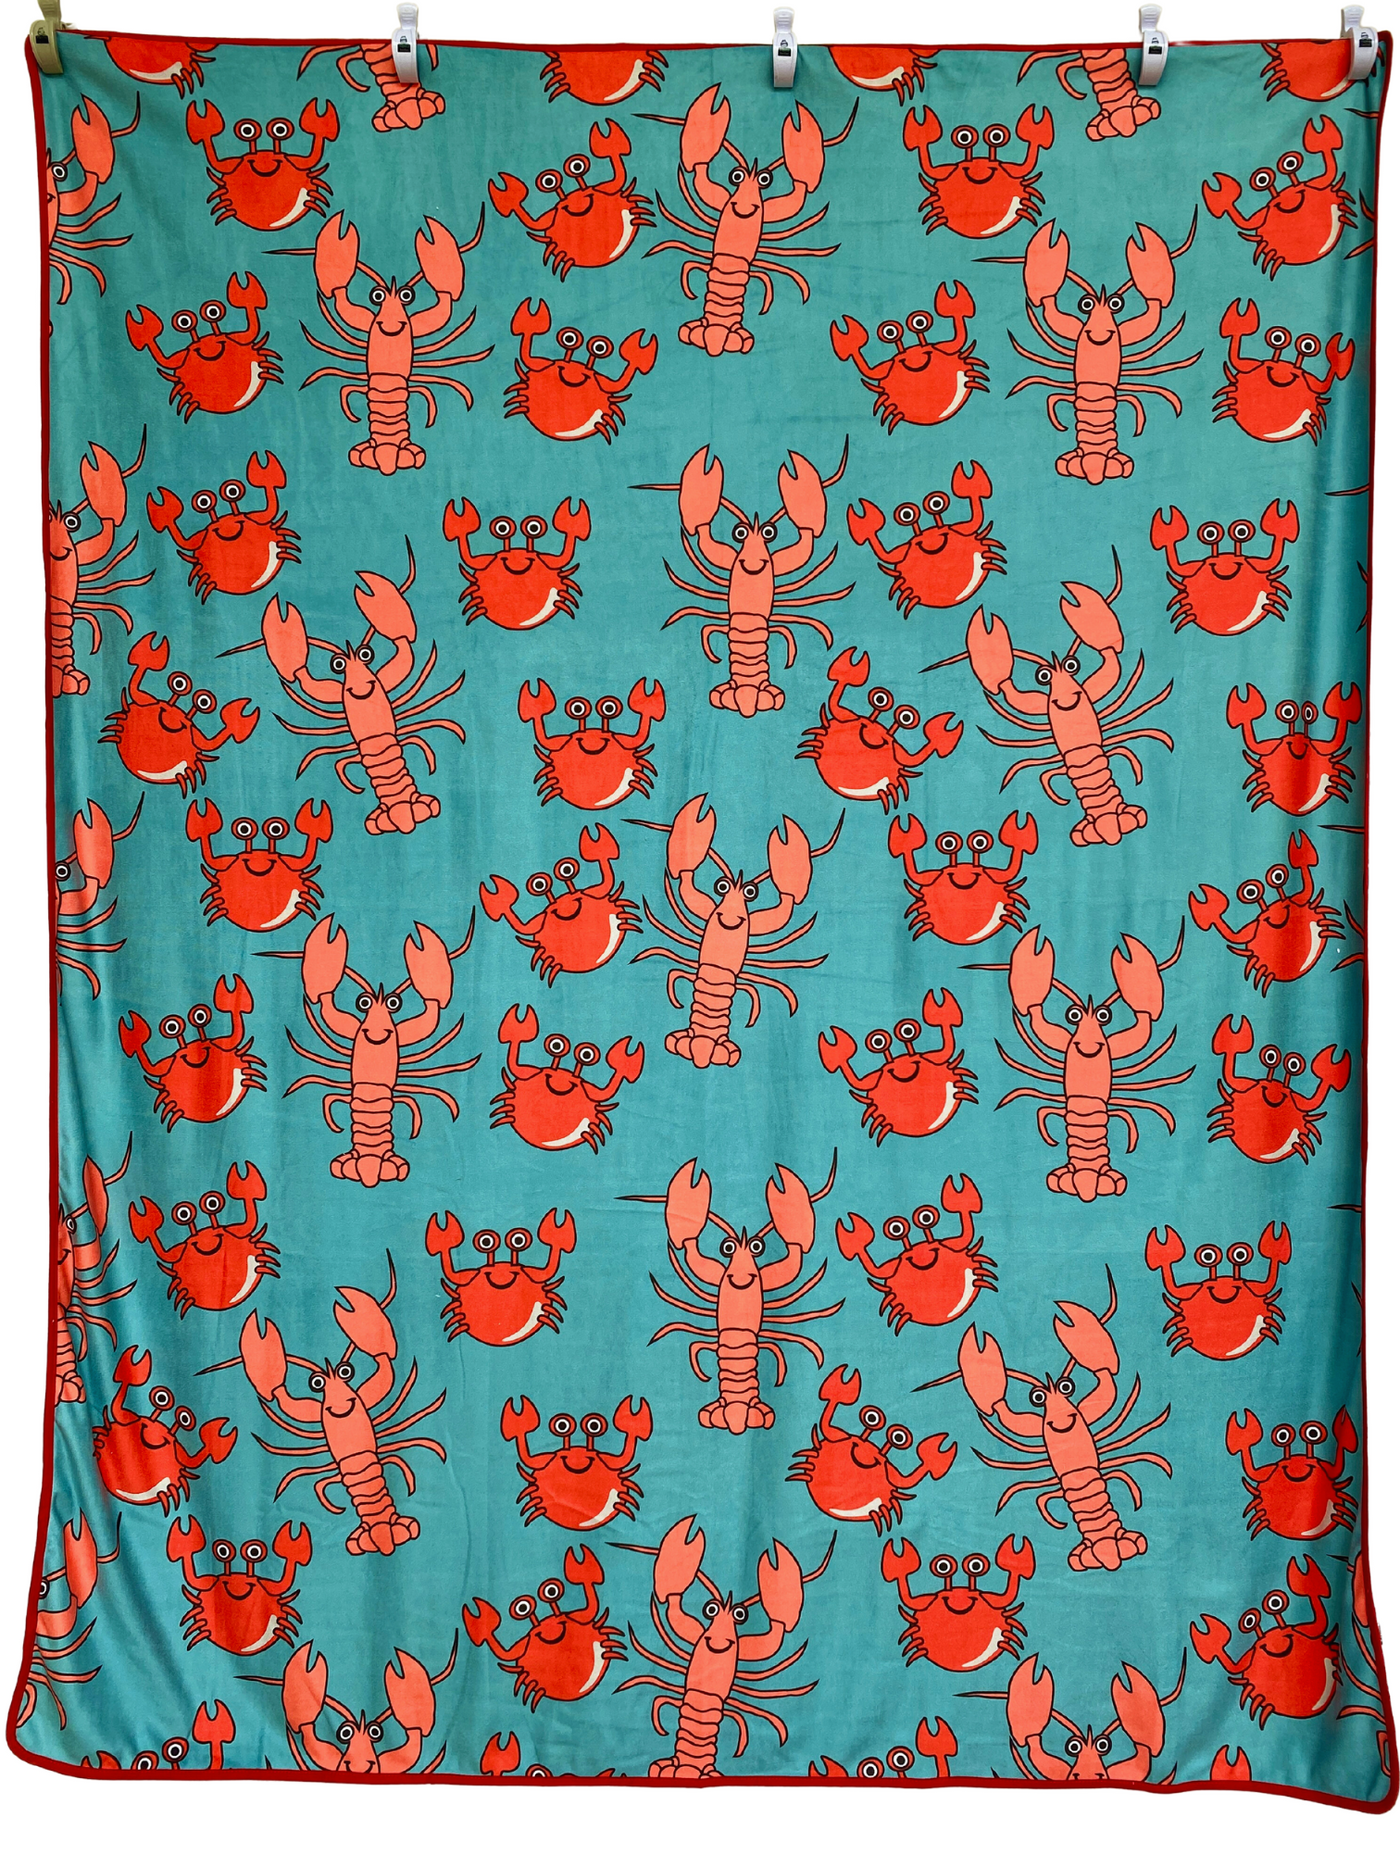 Giant Towel: Lobsters and crabs